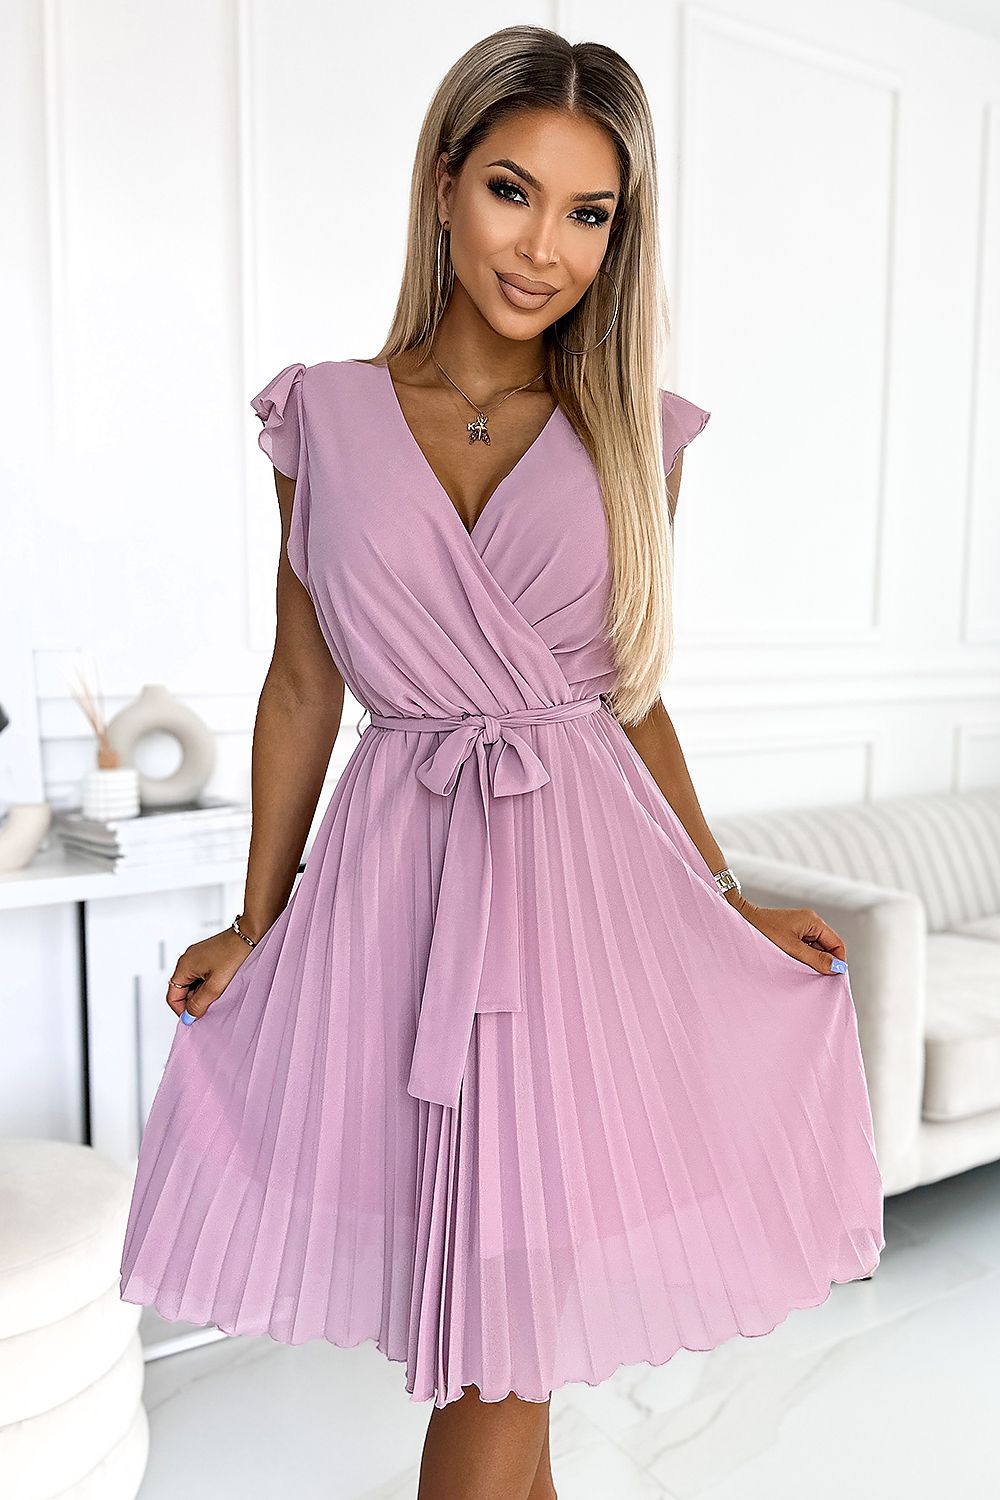 Fashionista Dirty Pink Cocktail Dress